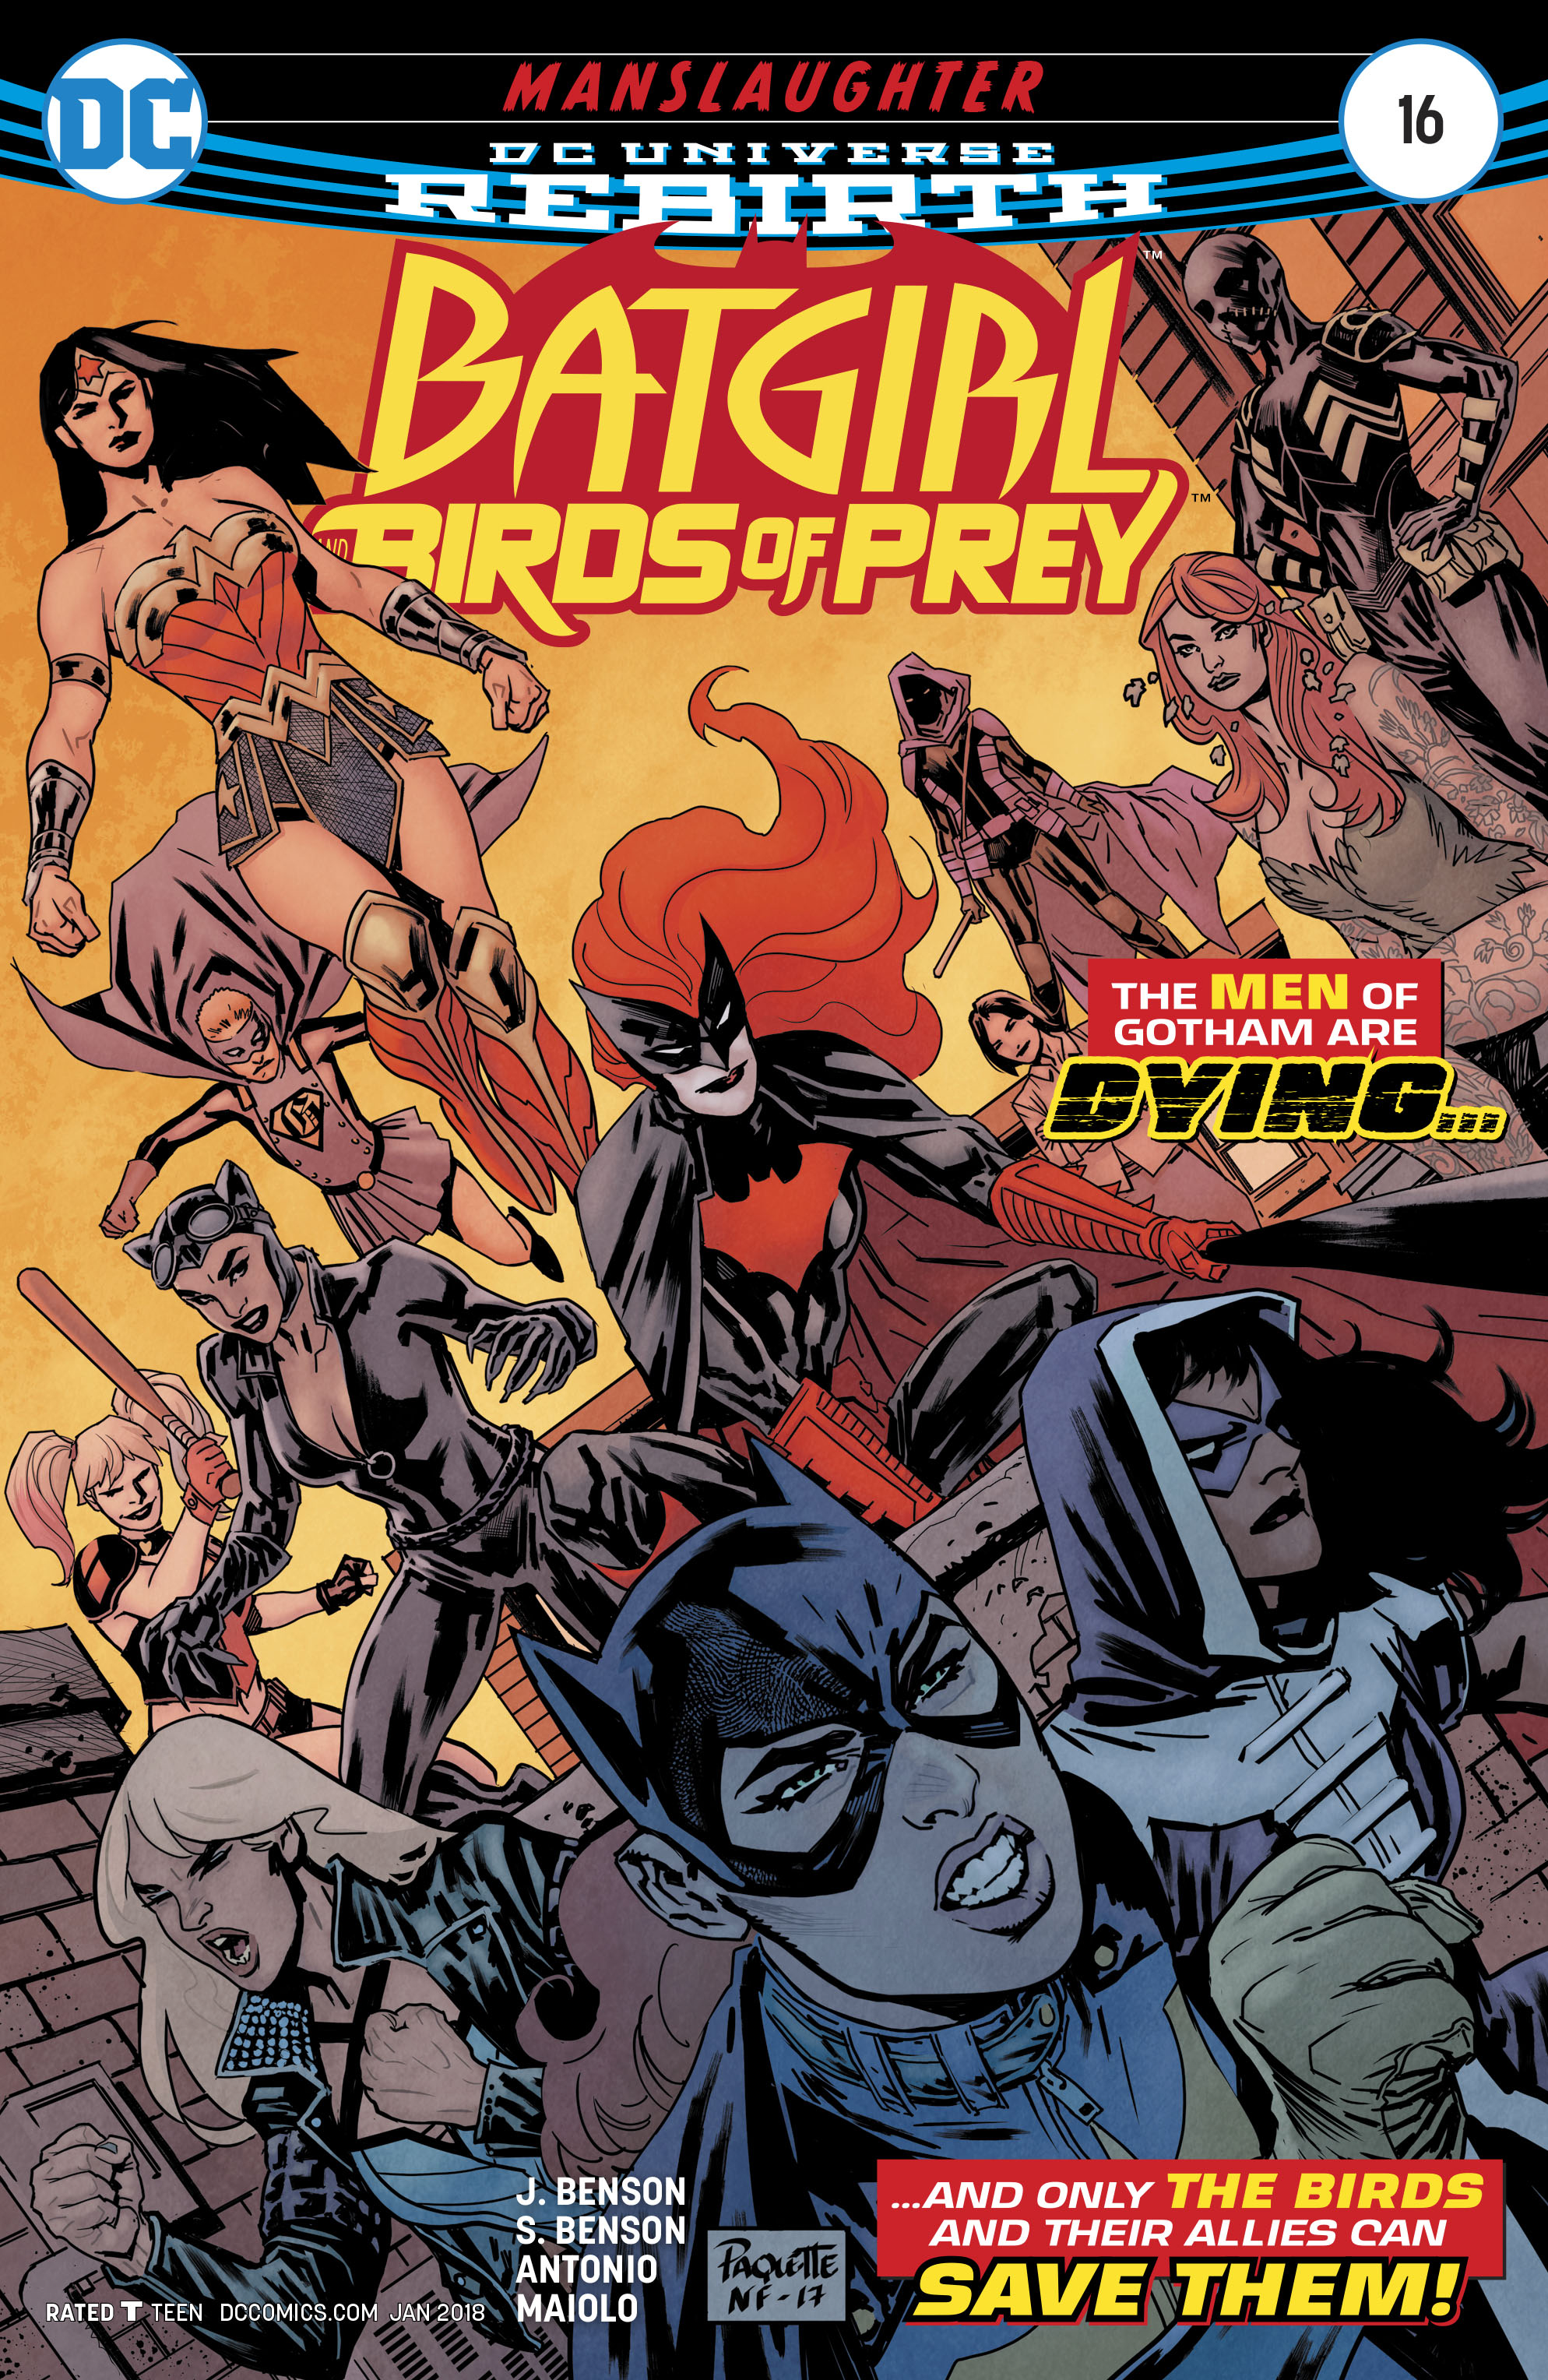 BATGIRL AND THE BIRDS OF PREY #16